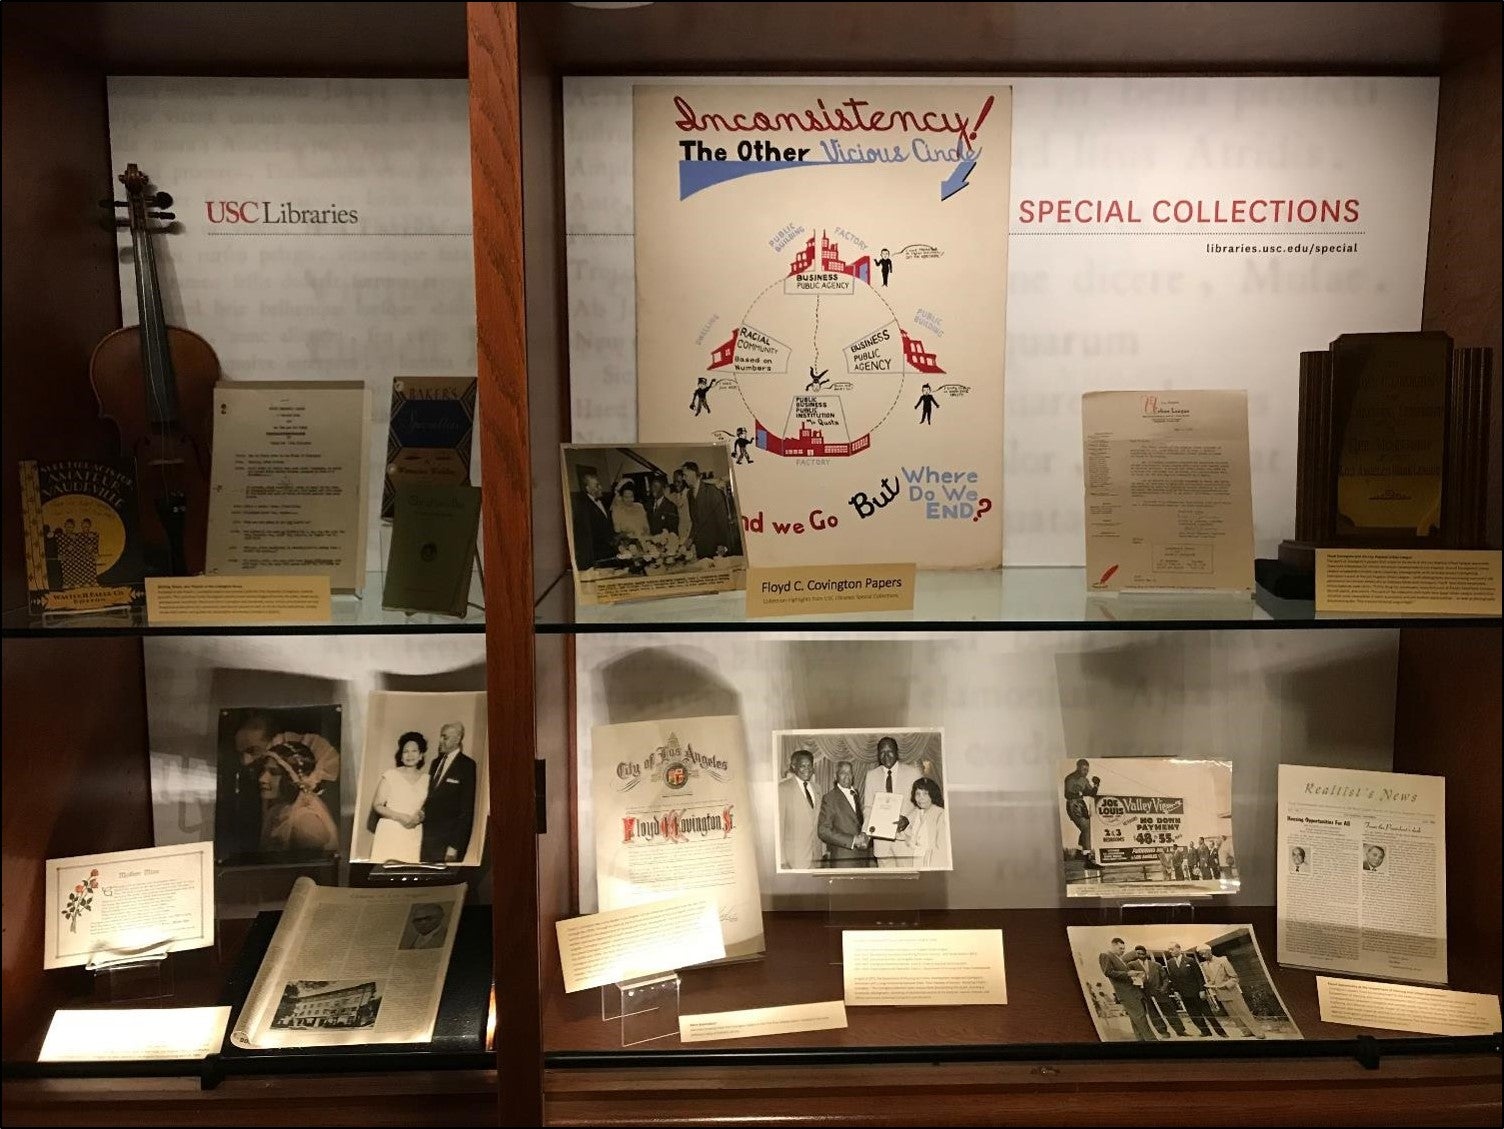 Floyd C. Covington papers - Special Collections display